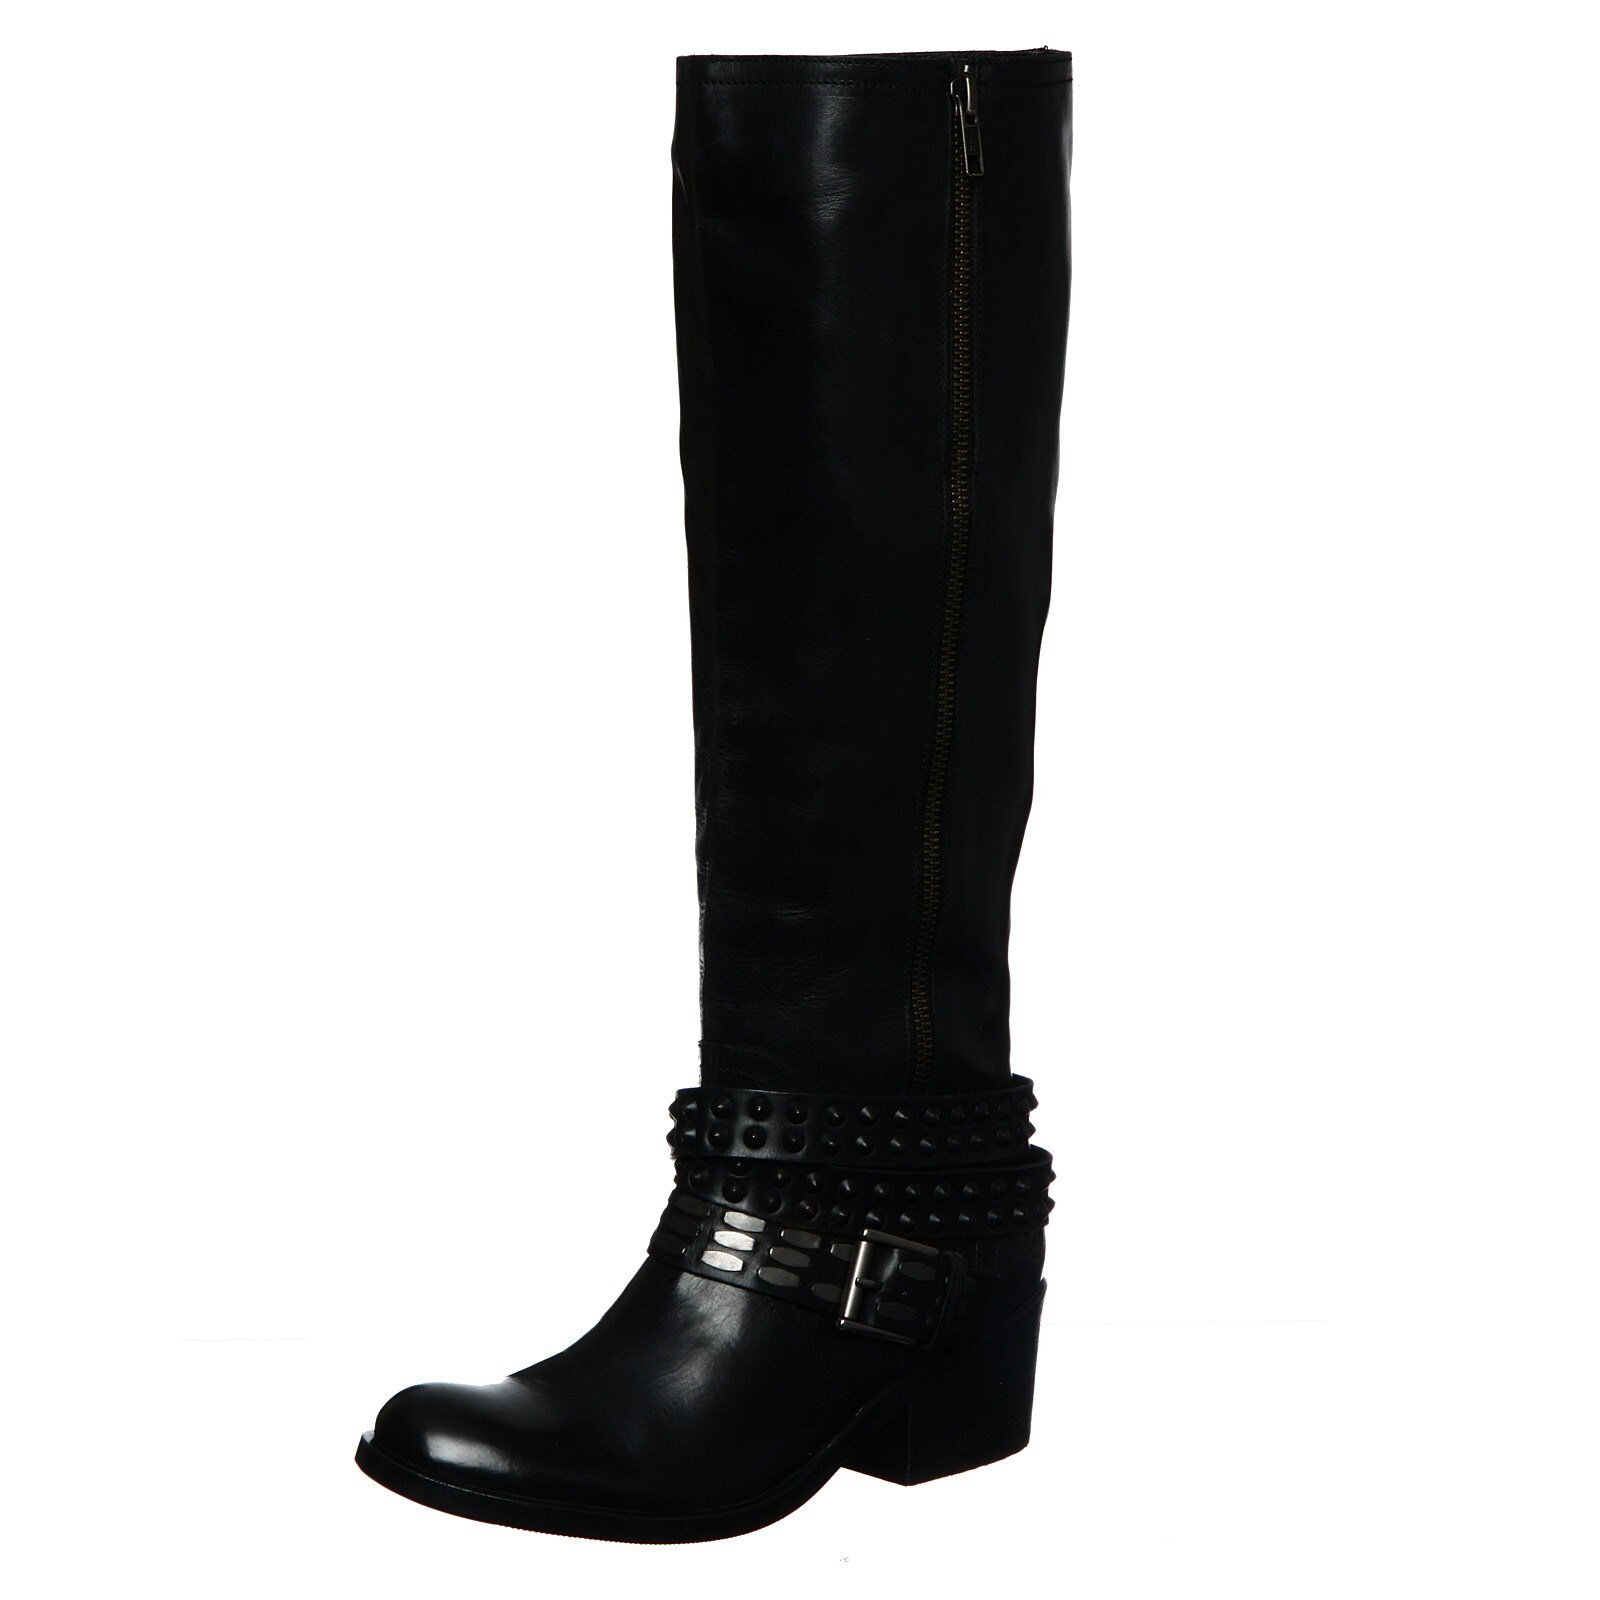 Bronx Women's 'Stuck On You' Black Tall Belted Riding Boots - Overstock ...